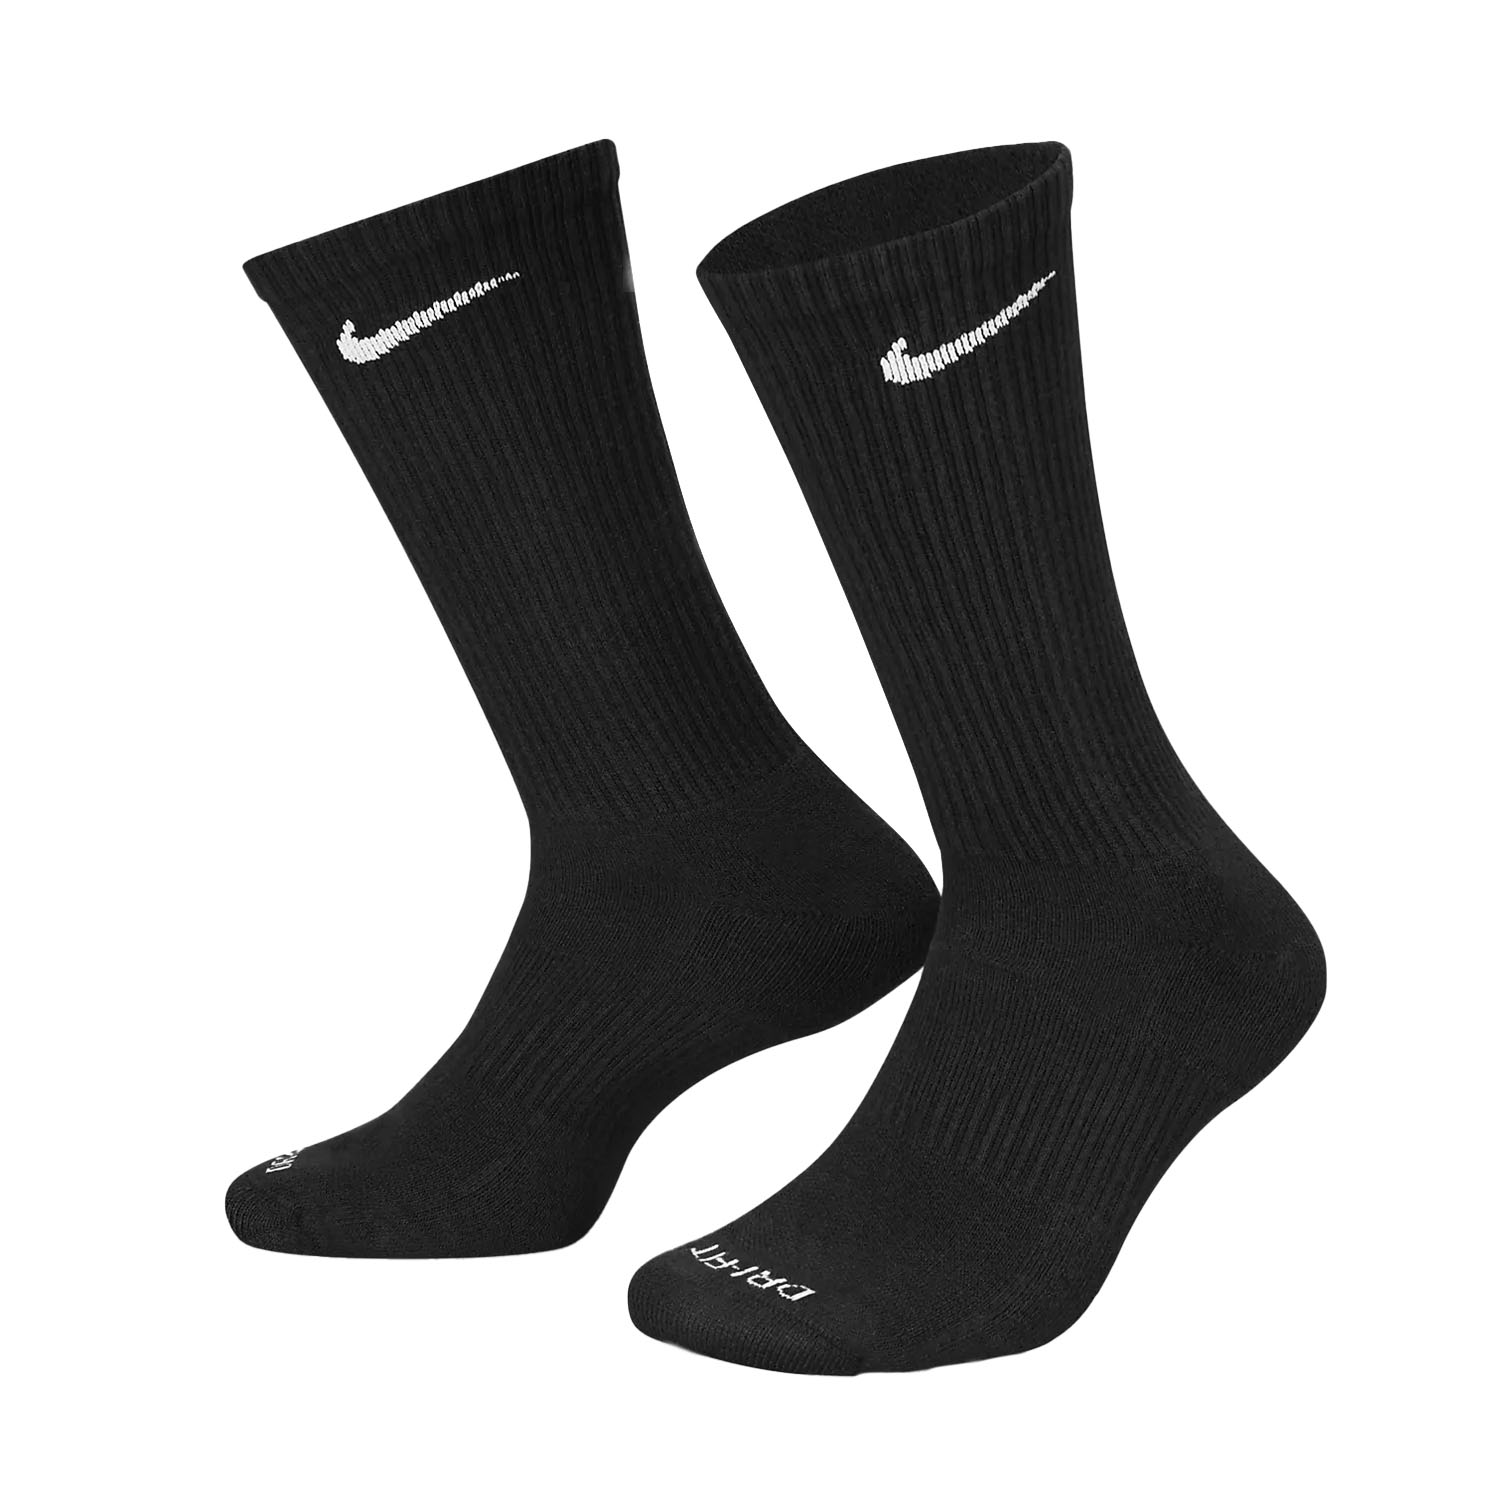 Nike Everyday Plus Cushioned x 6 Calcetines - Black/White